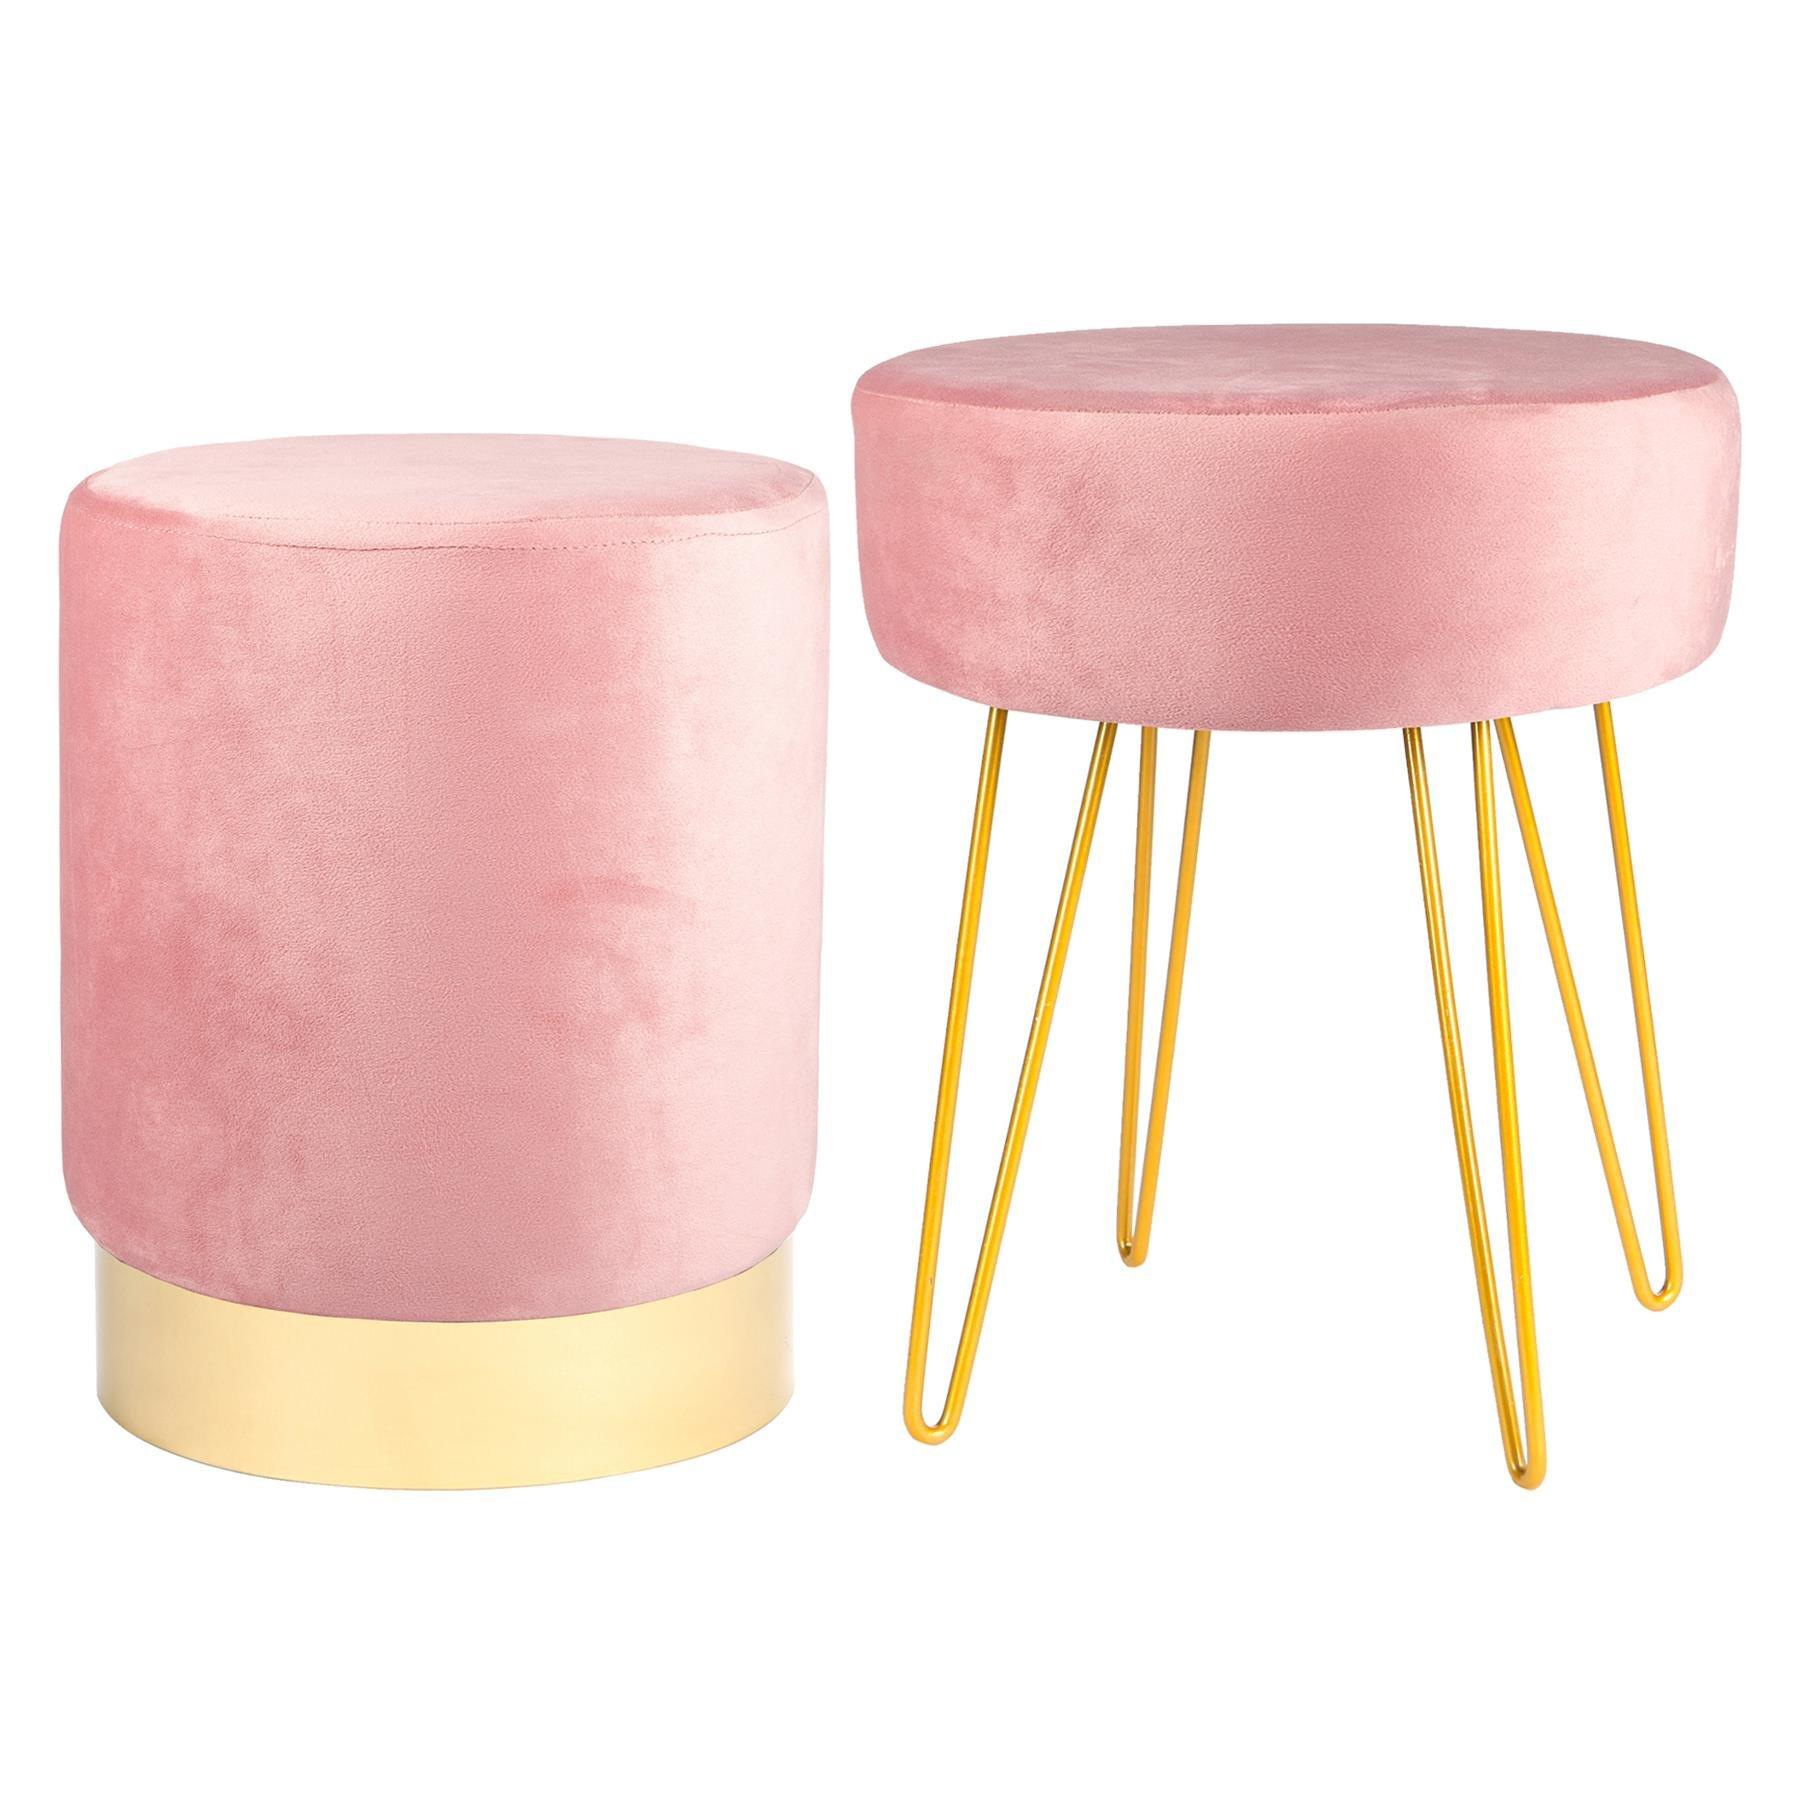 Harbour Housewares  2 Piece Round Velvet Footstools Set - Luxe Living Room Bedroom Dressing Table Accent Pouffe - Pink